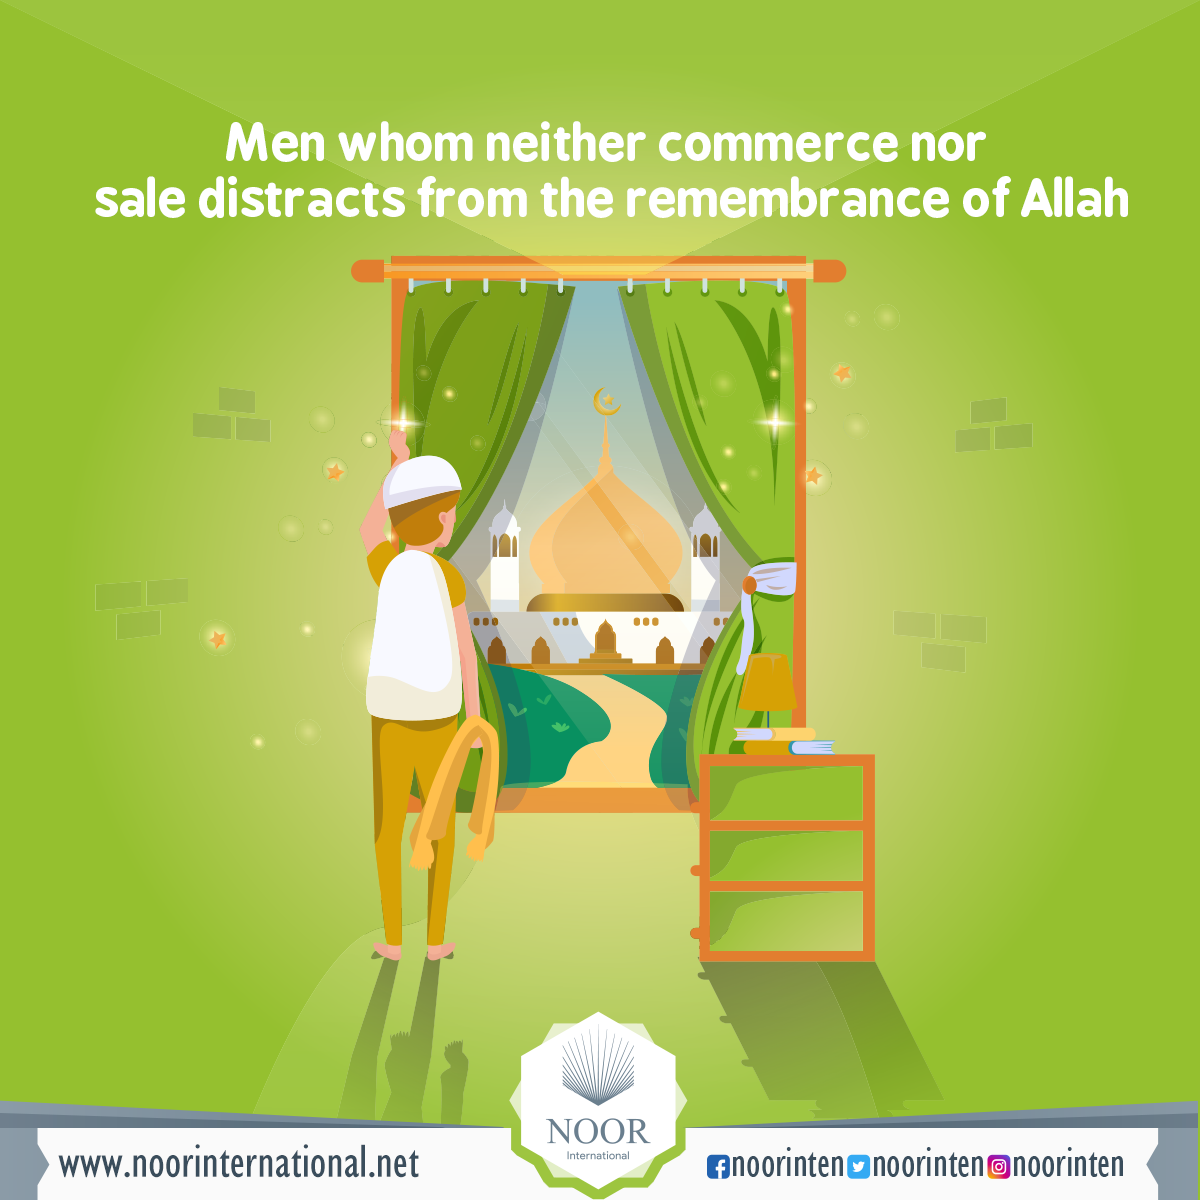 Men whom neither commerce nor sale distracts from the remembrance of Allah